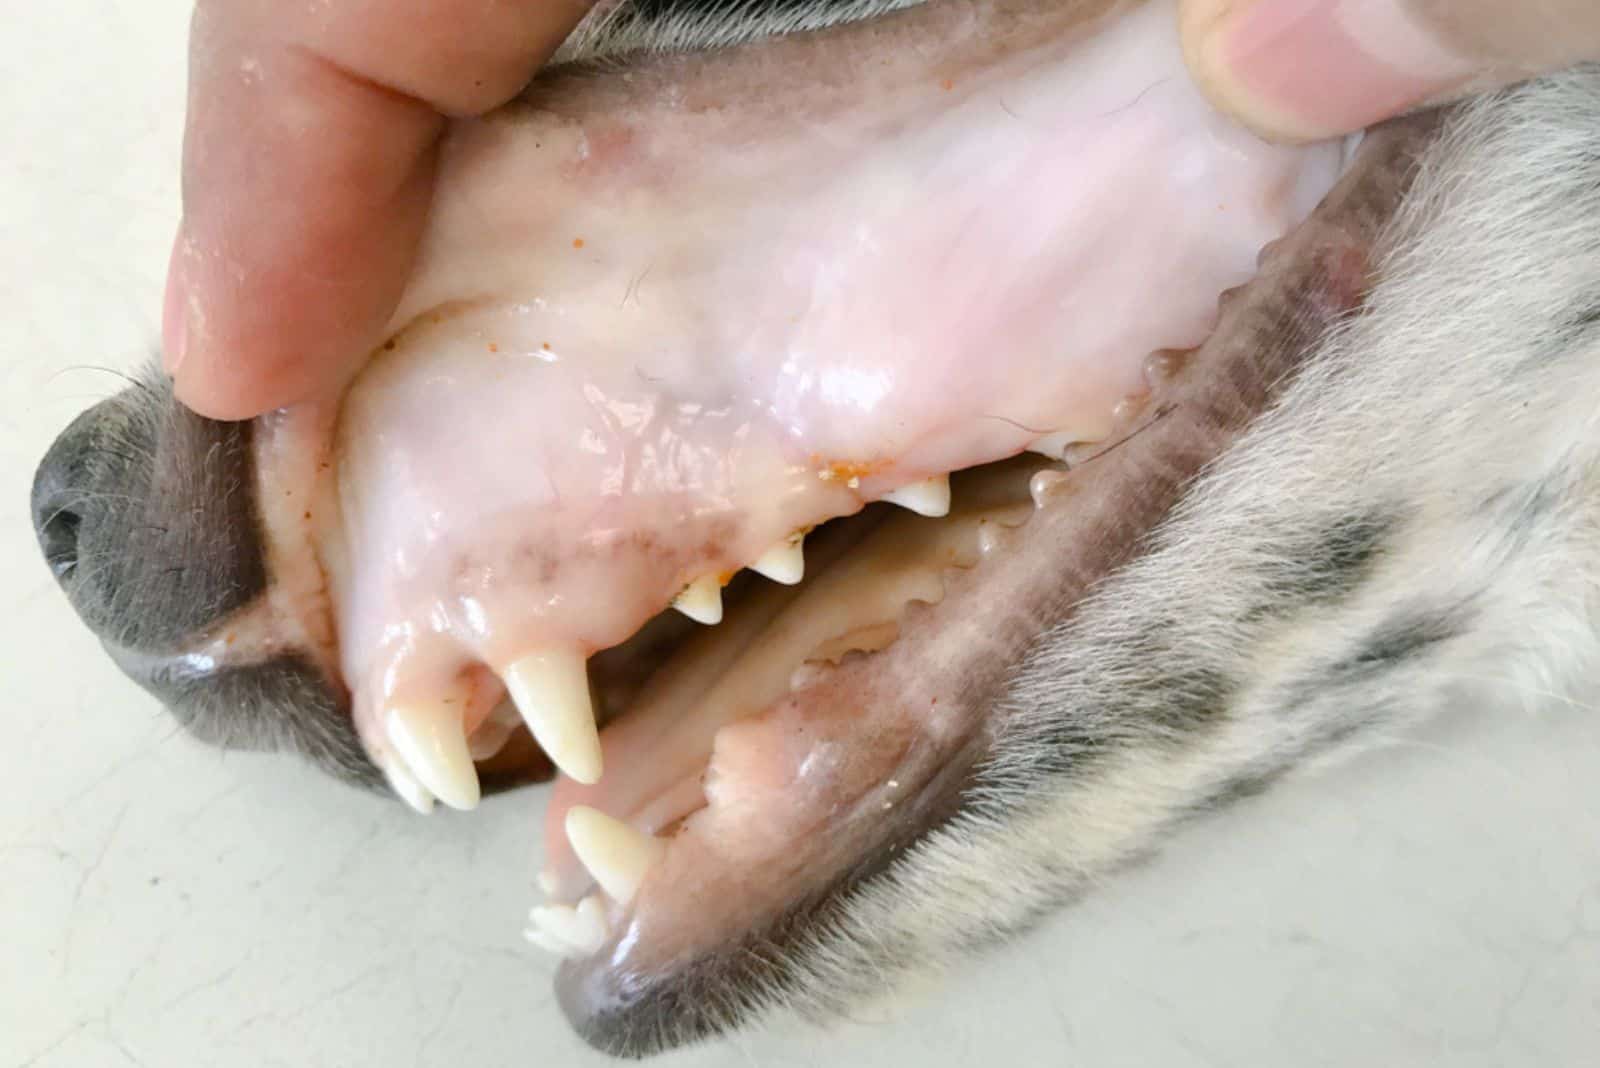 veterinarian examine the dog with pale gums